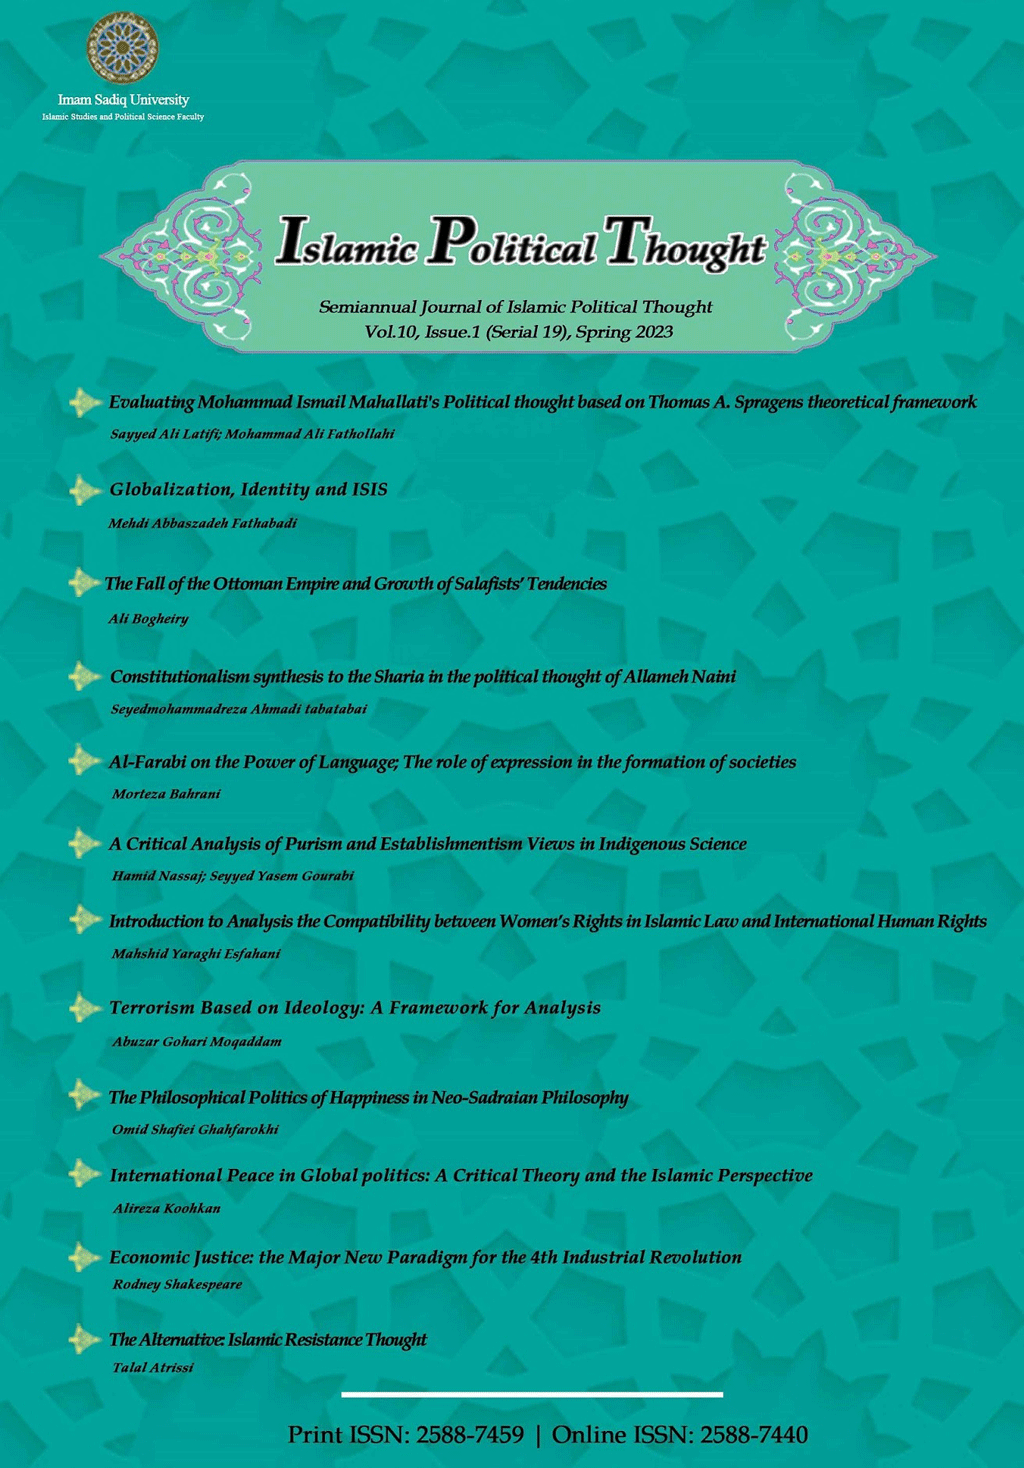 Islamic Political Thoughts - Fall 2016, Volume 3 - Number 2